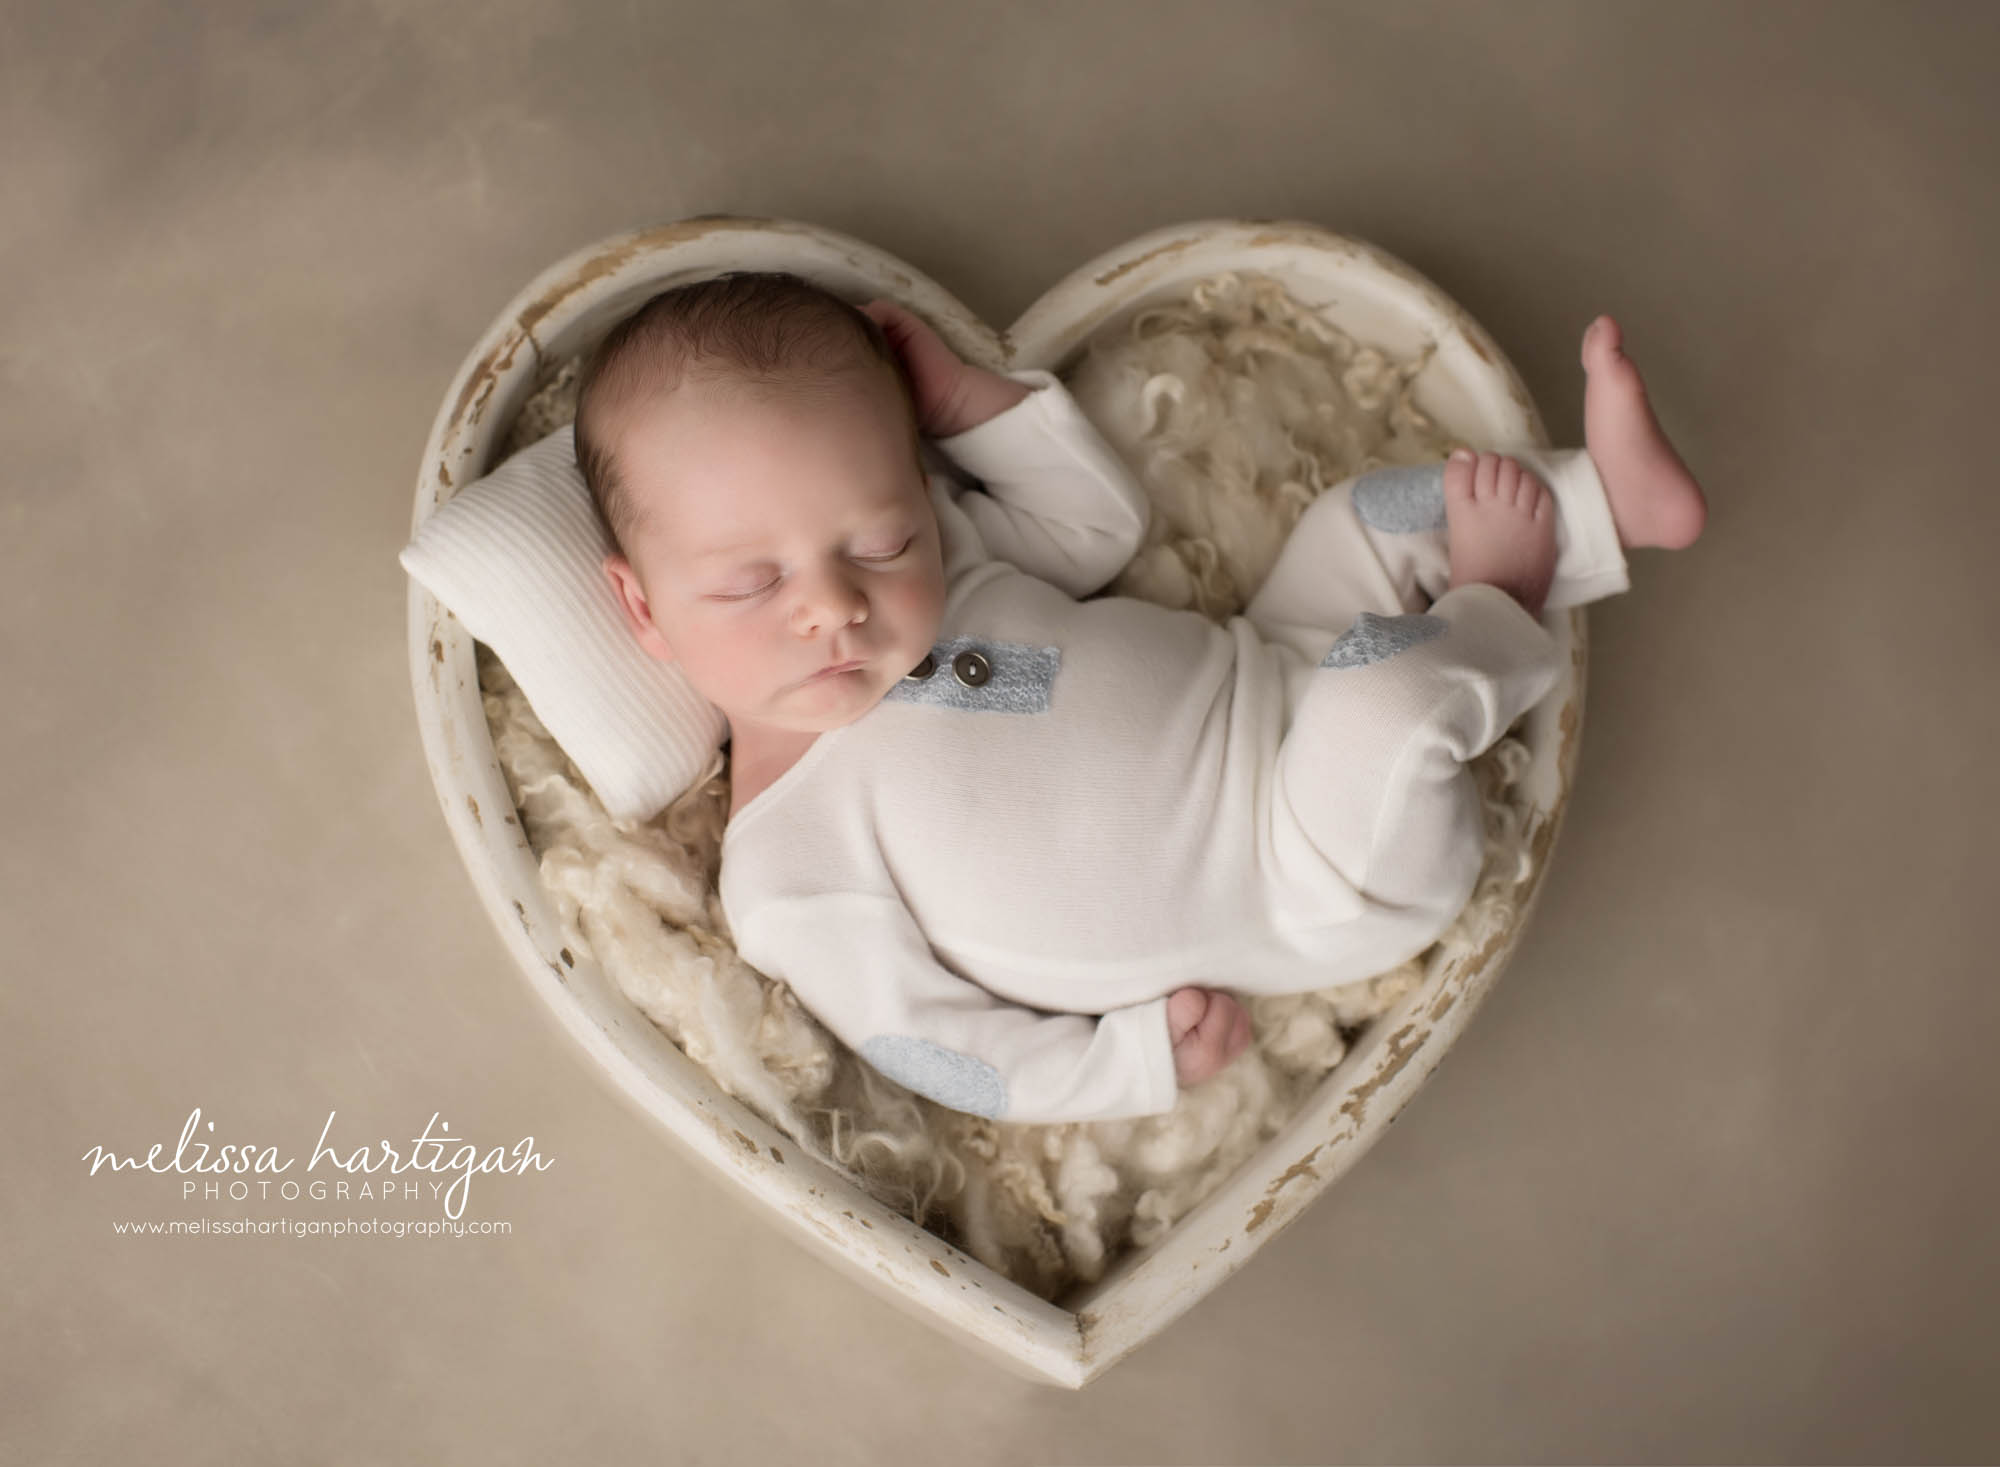 newborn baby boy wearing cream colored outfit posed in cream colored bowl